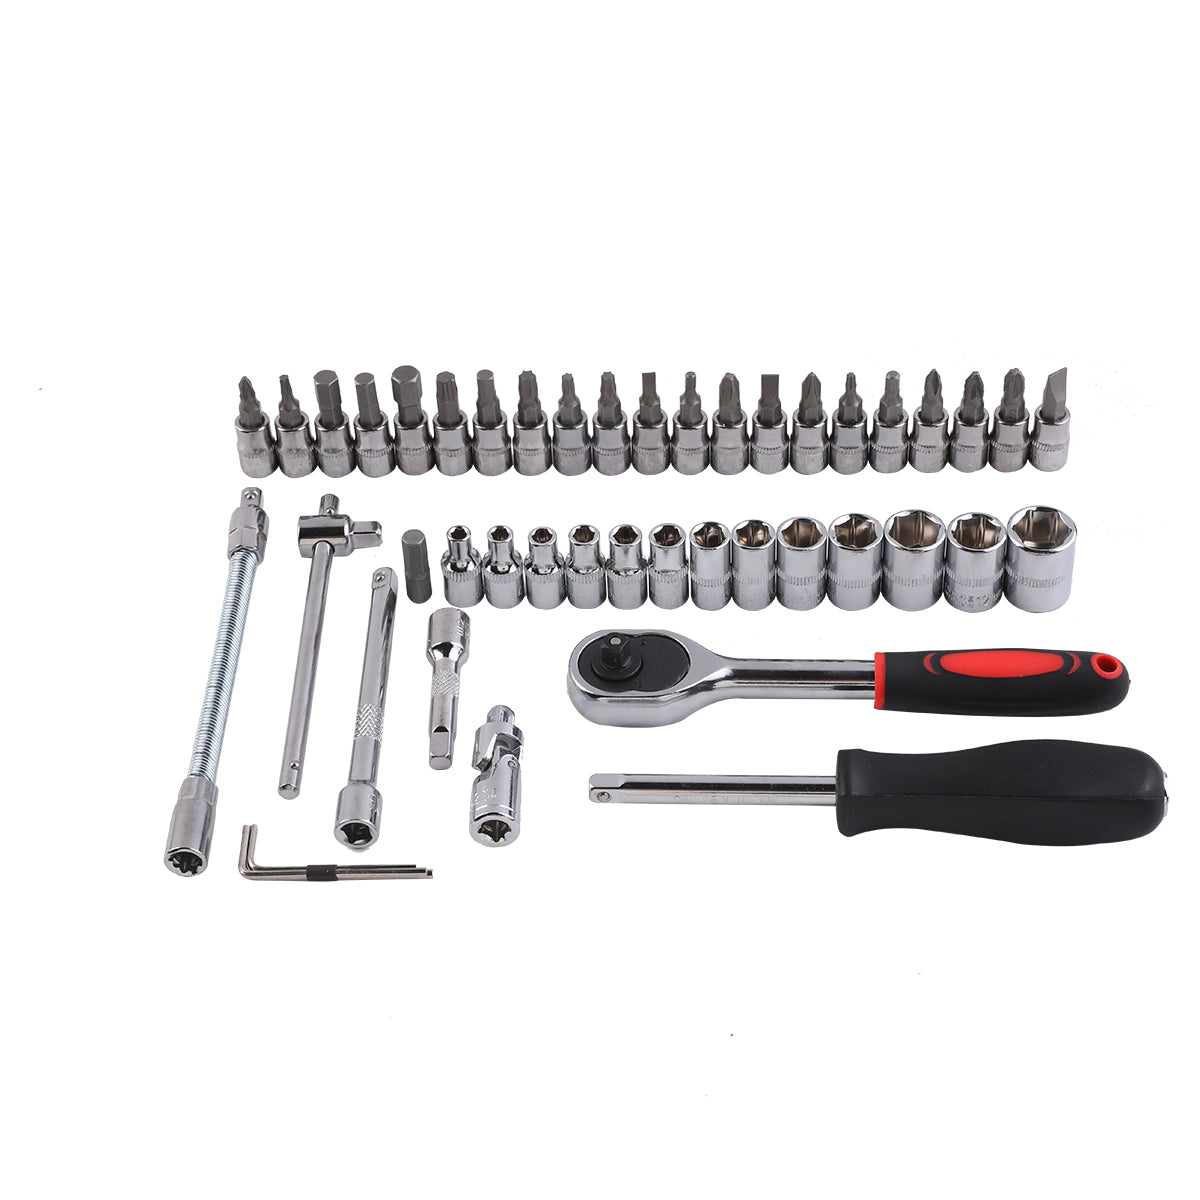 46-Piece Tools Set With Carry Case